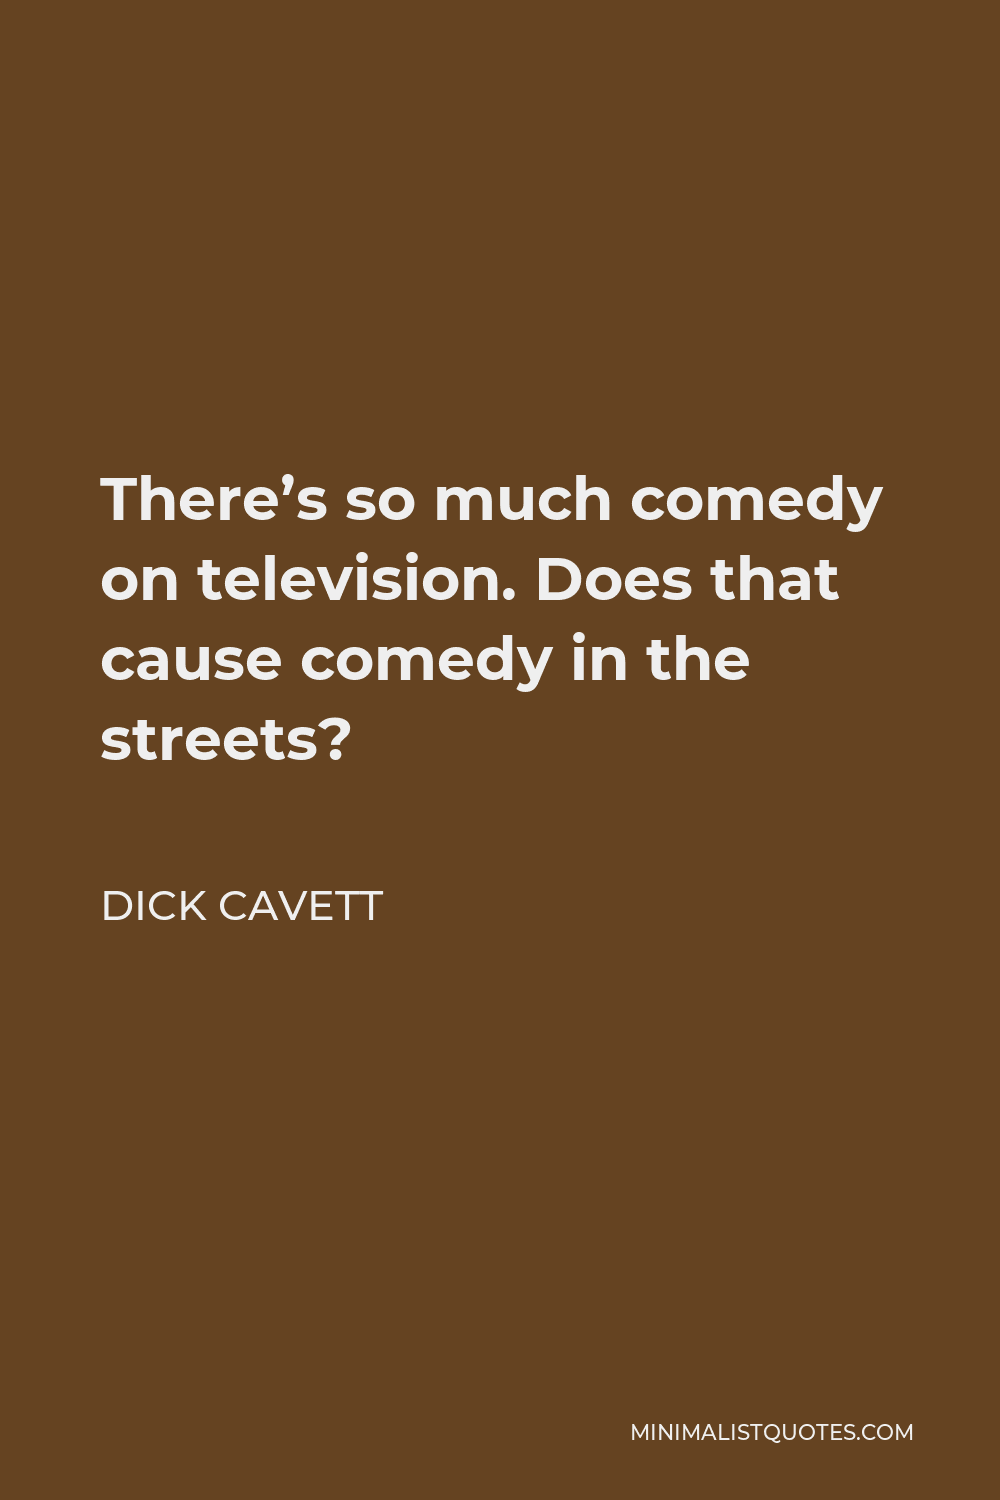 Dick Cavett Quote - There’s so much comedy on television. Does that cause comedy in the streets?